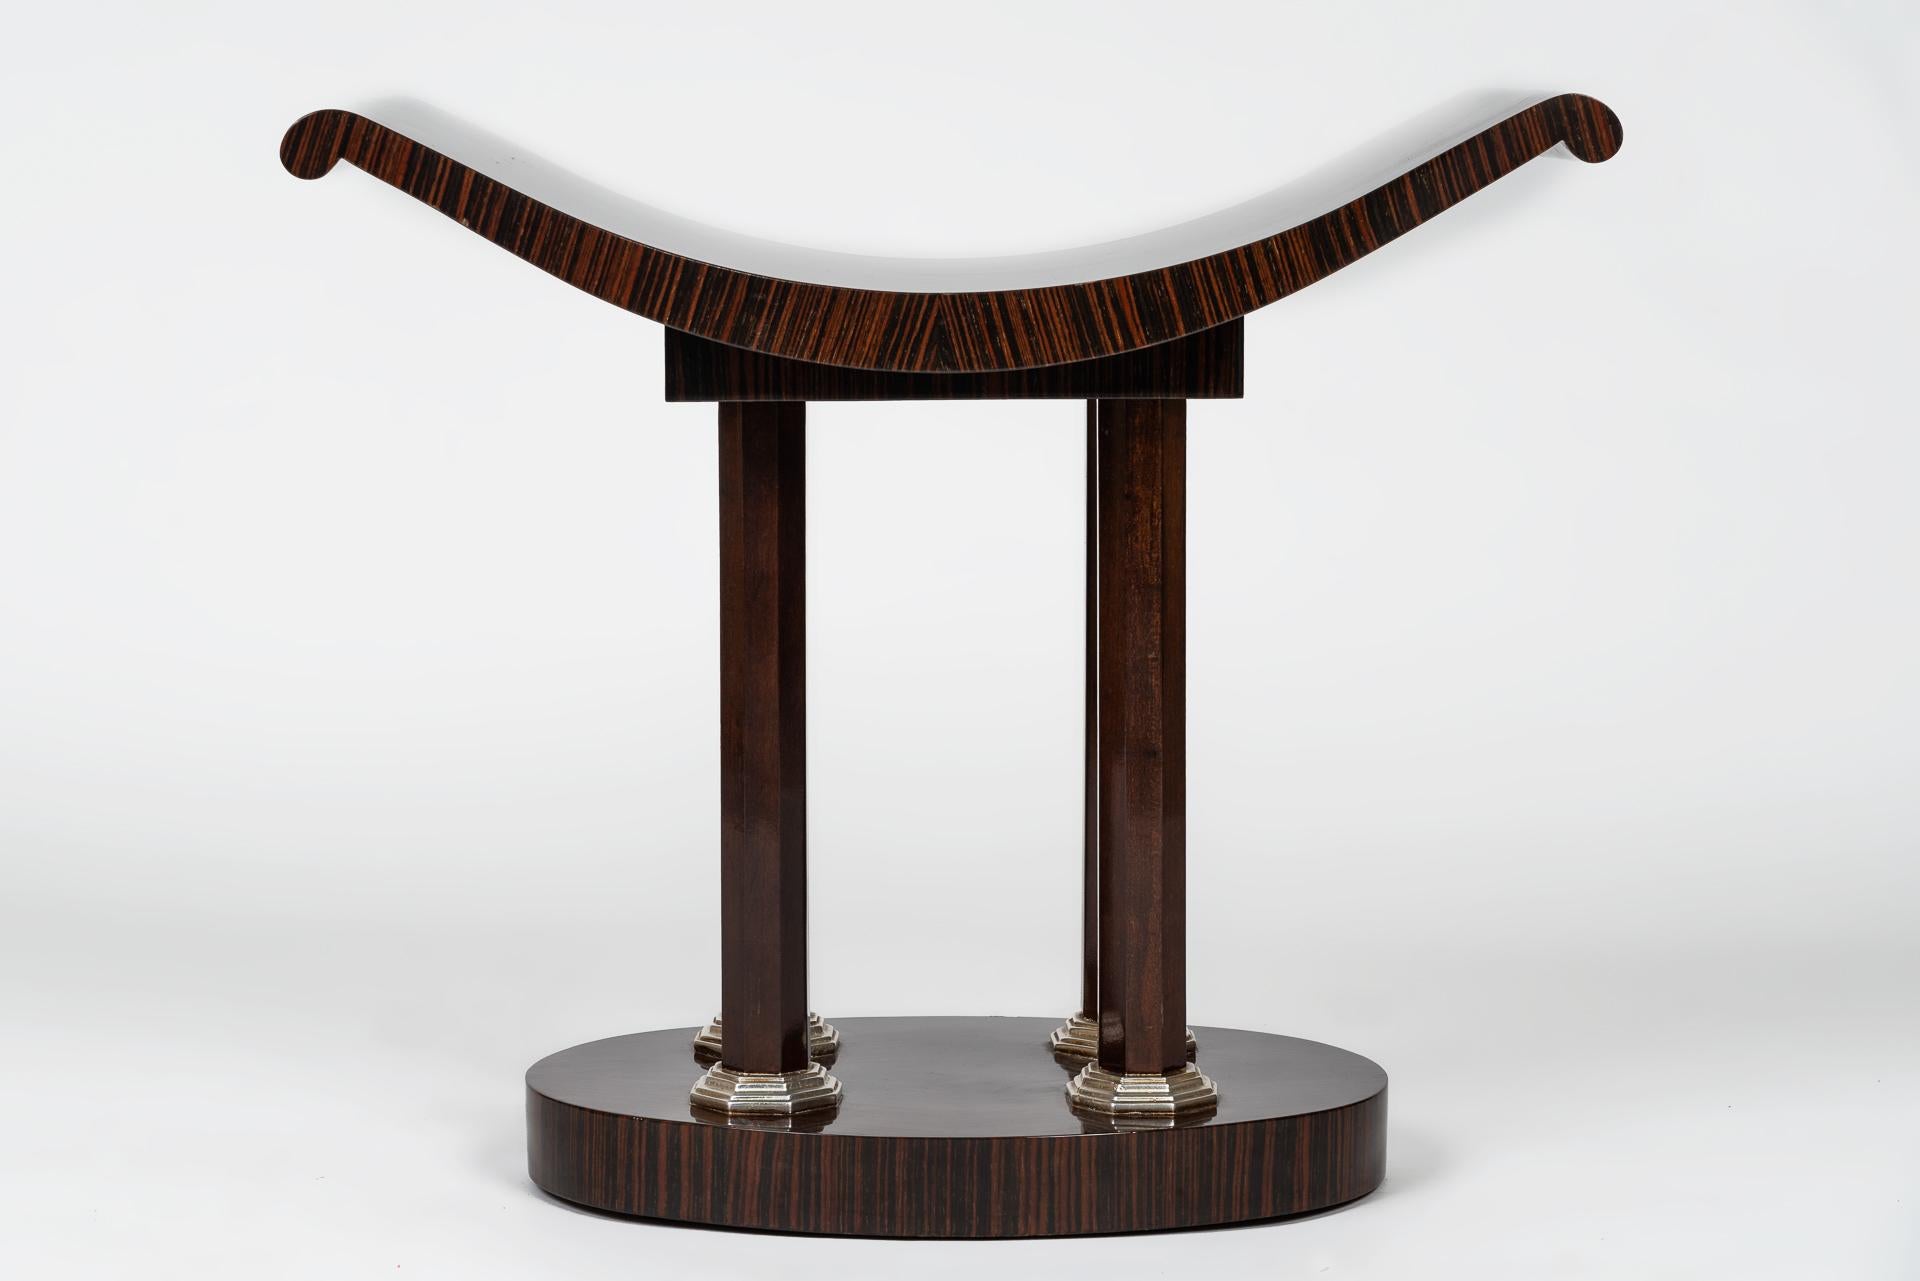 This beautiful Art Deco stool was designed by E. Gray for the manufacture of EVE in Italy. It is especially beautifully crafted in the grain of ebony. The wood grain has been mirrored 4 times to create a beautiful pattern on the seat and the